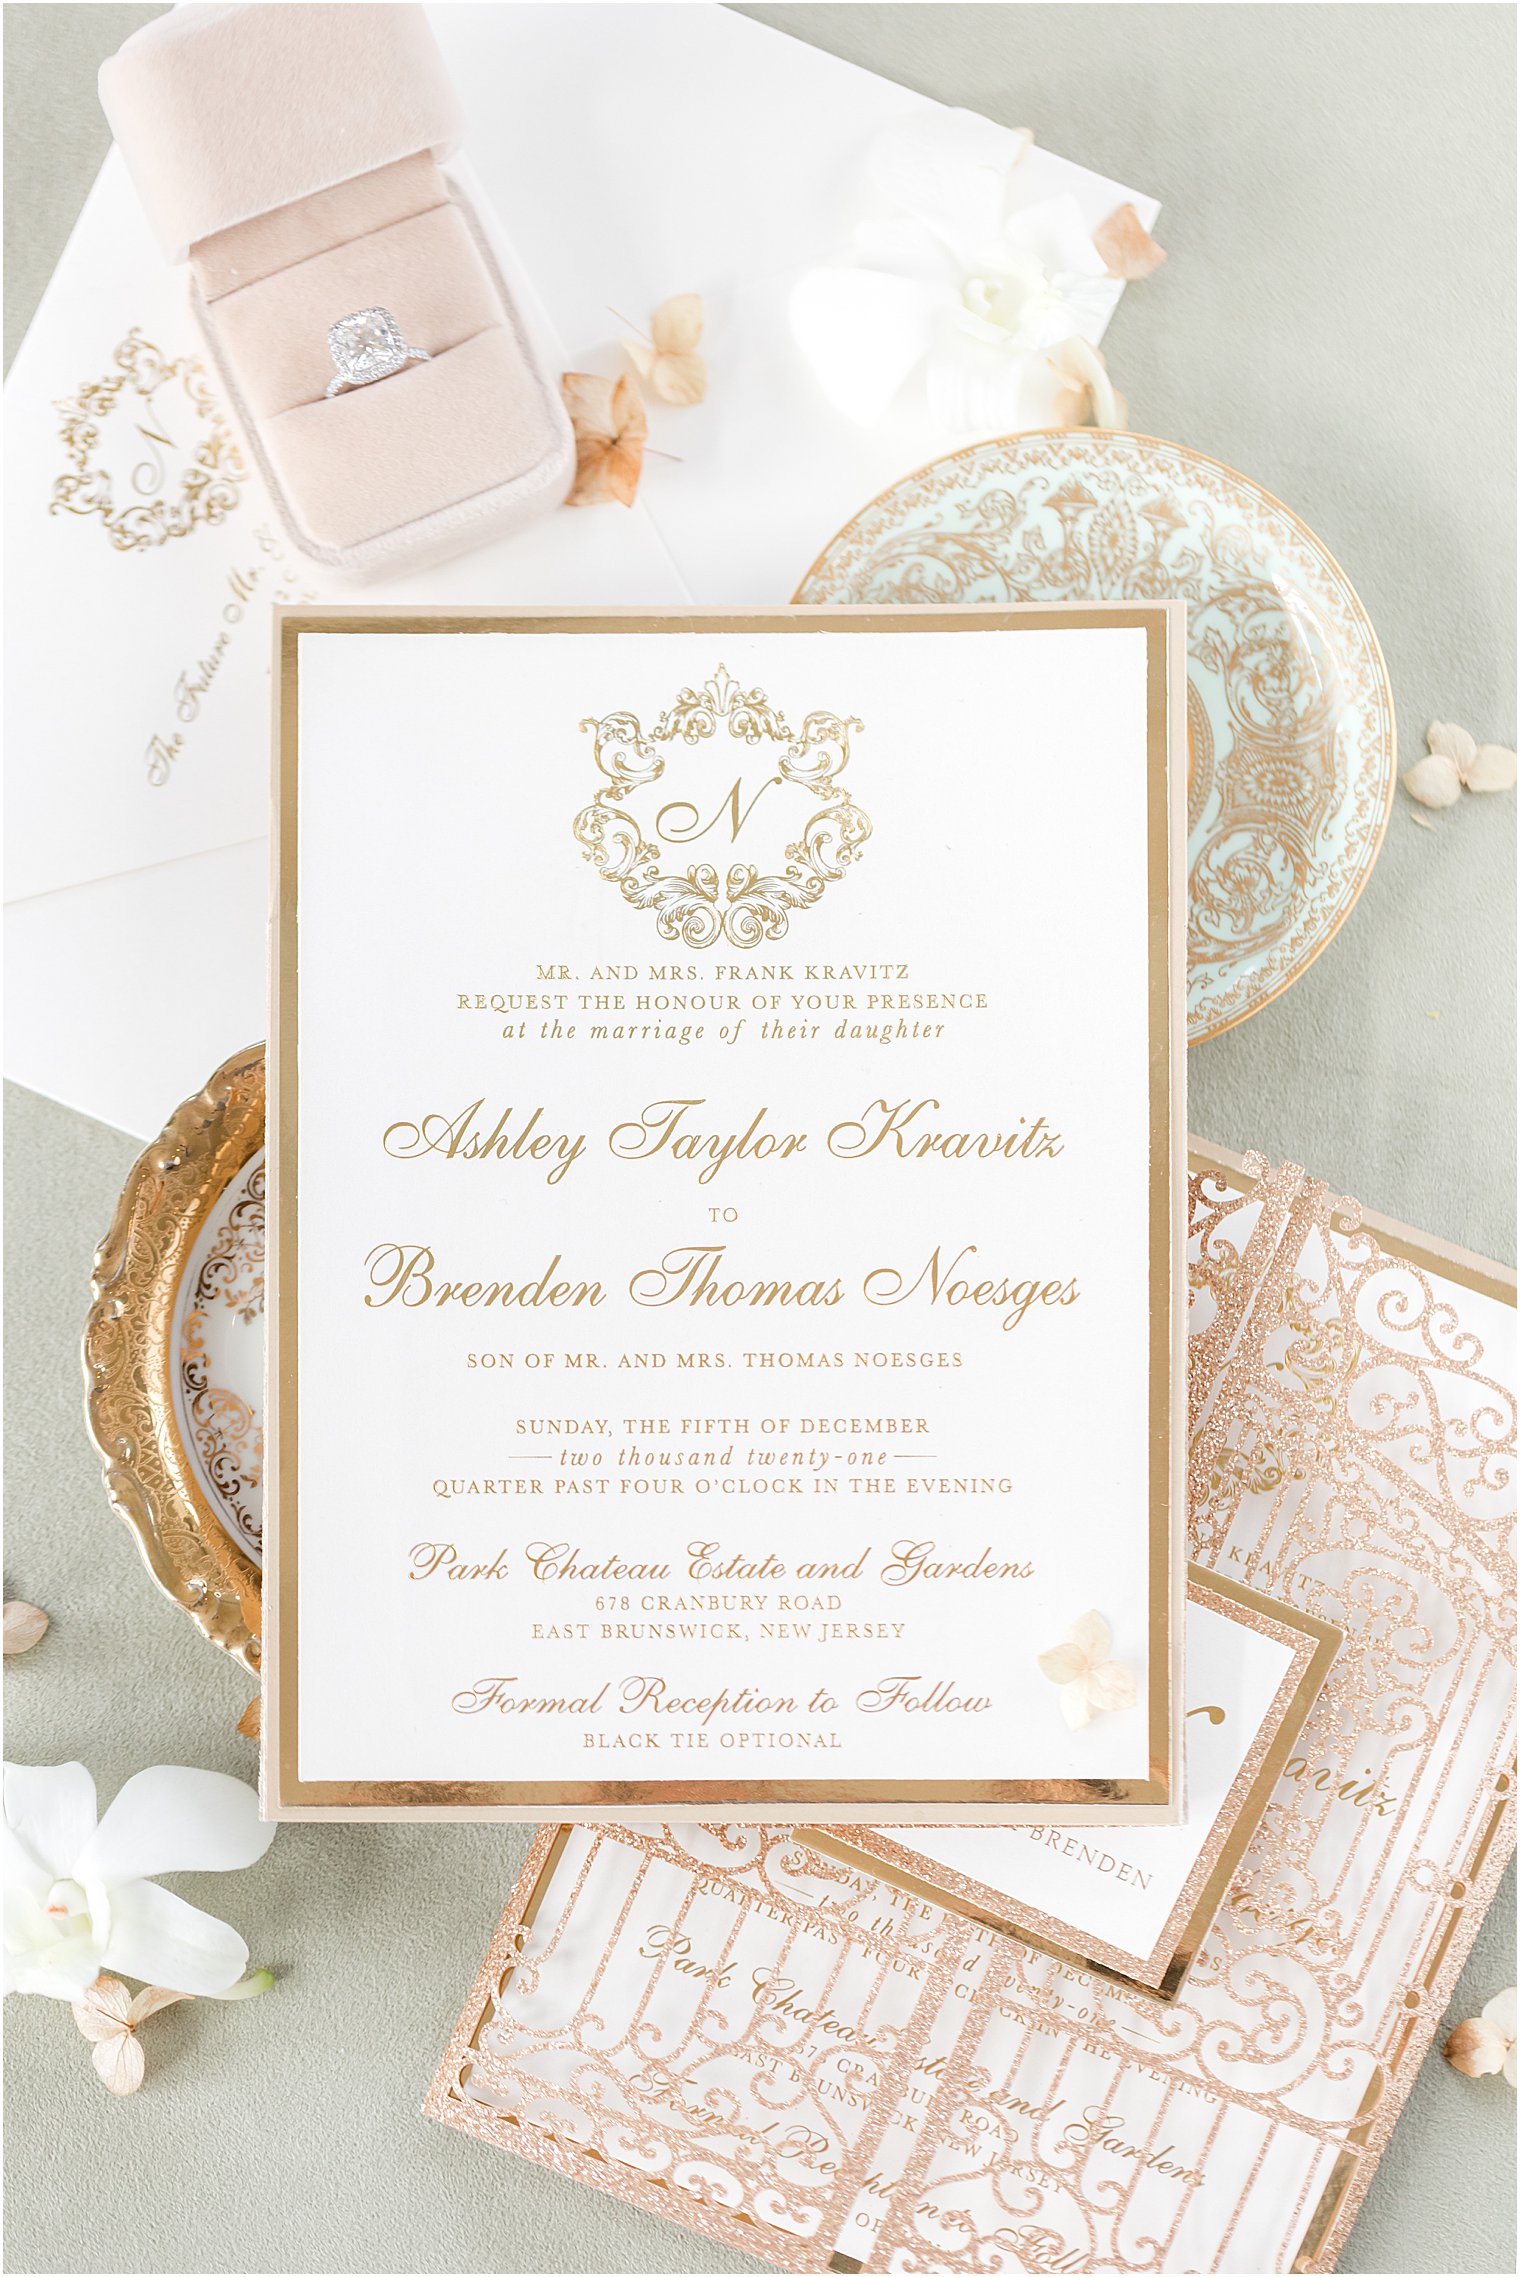 gold and white invitation suite for winter Park Chateau Estate wedding